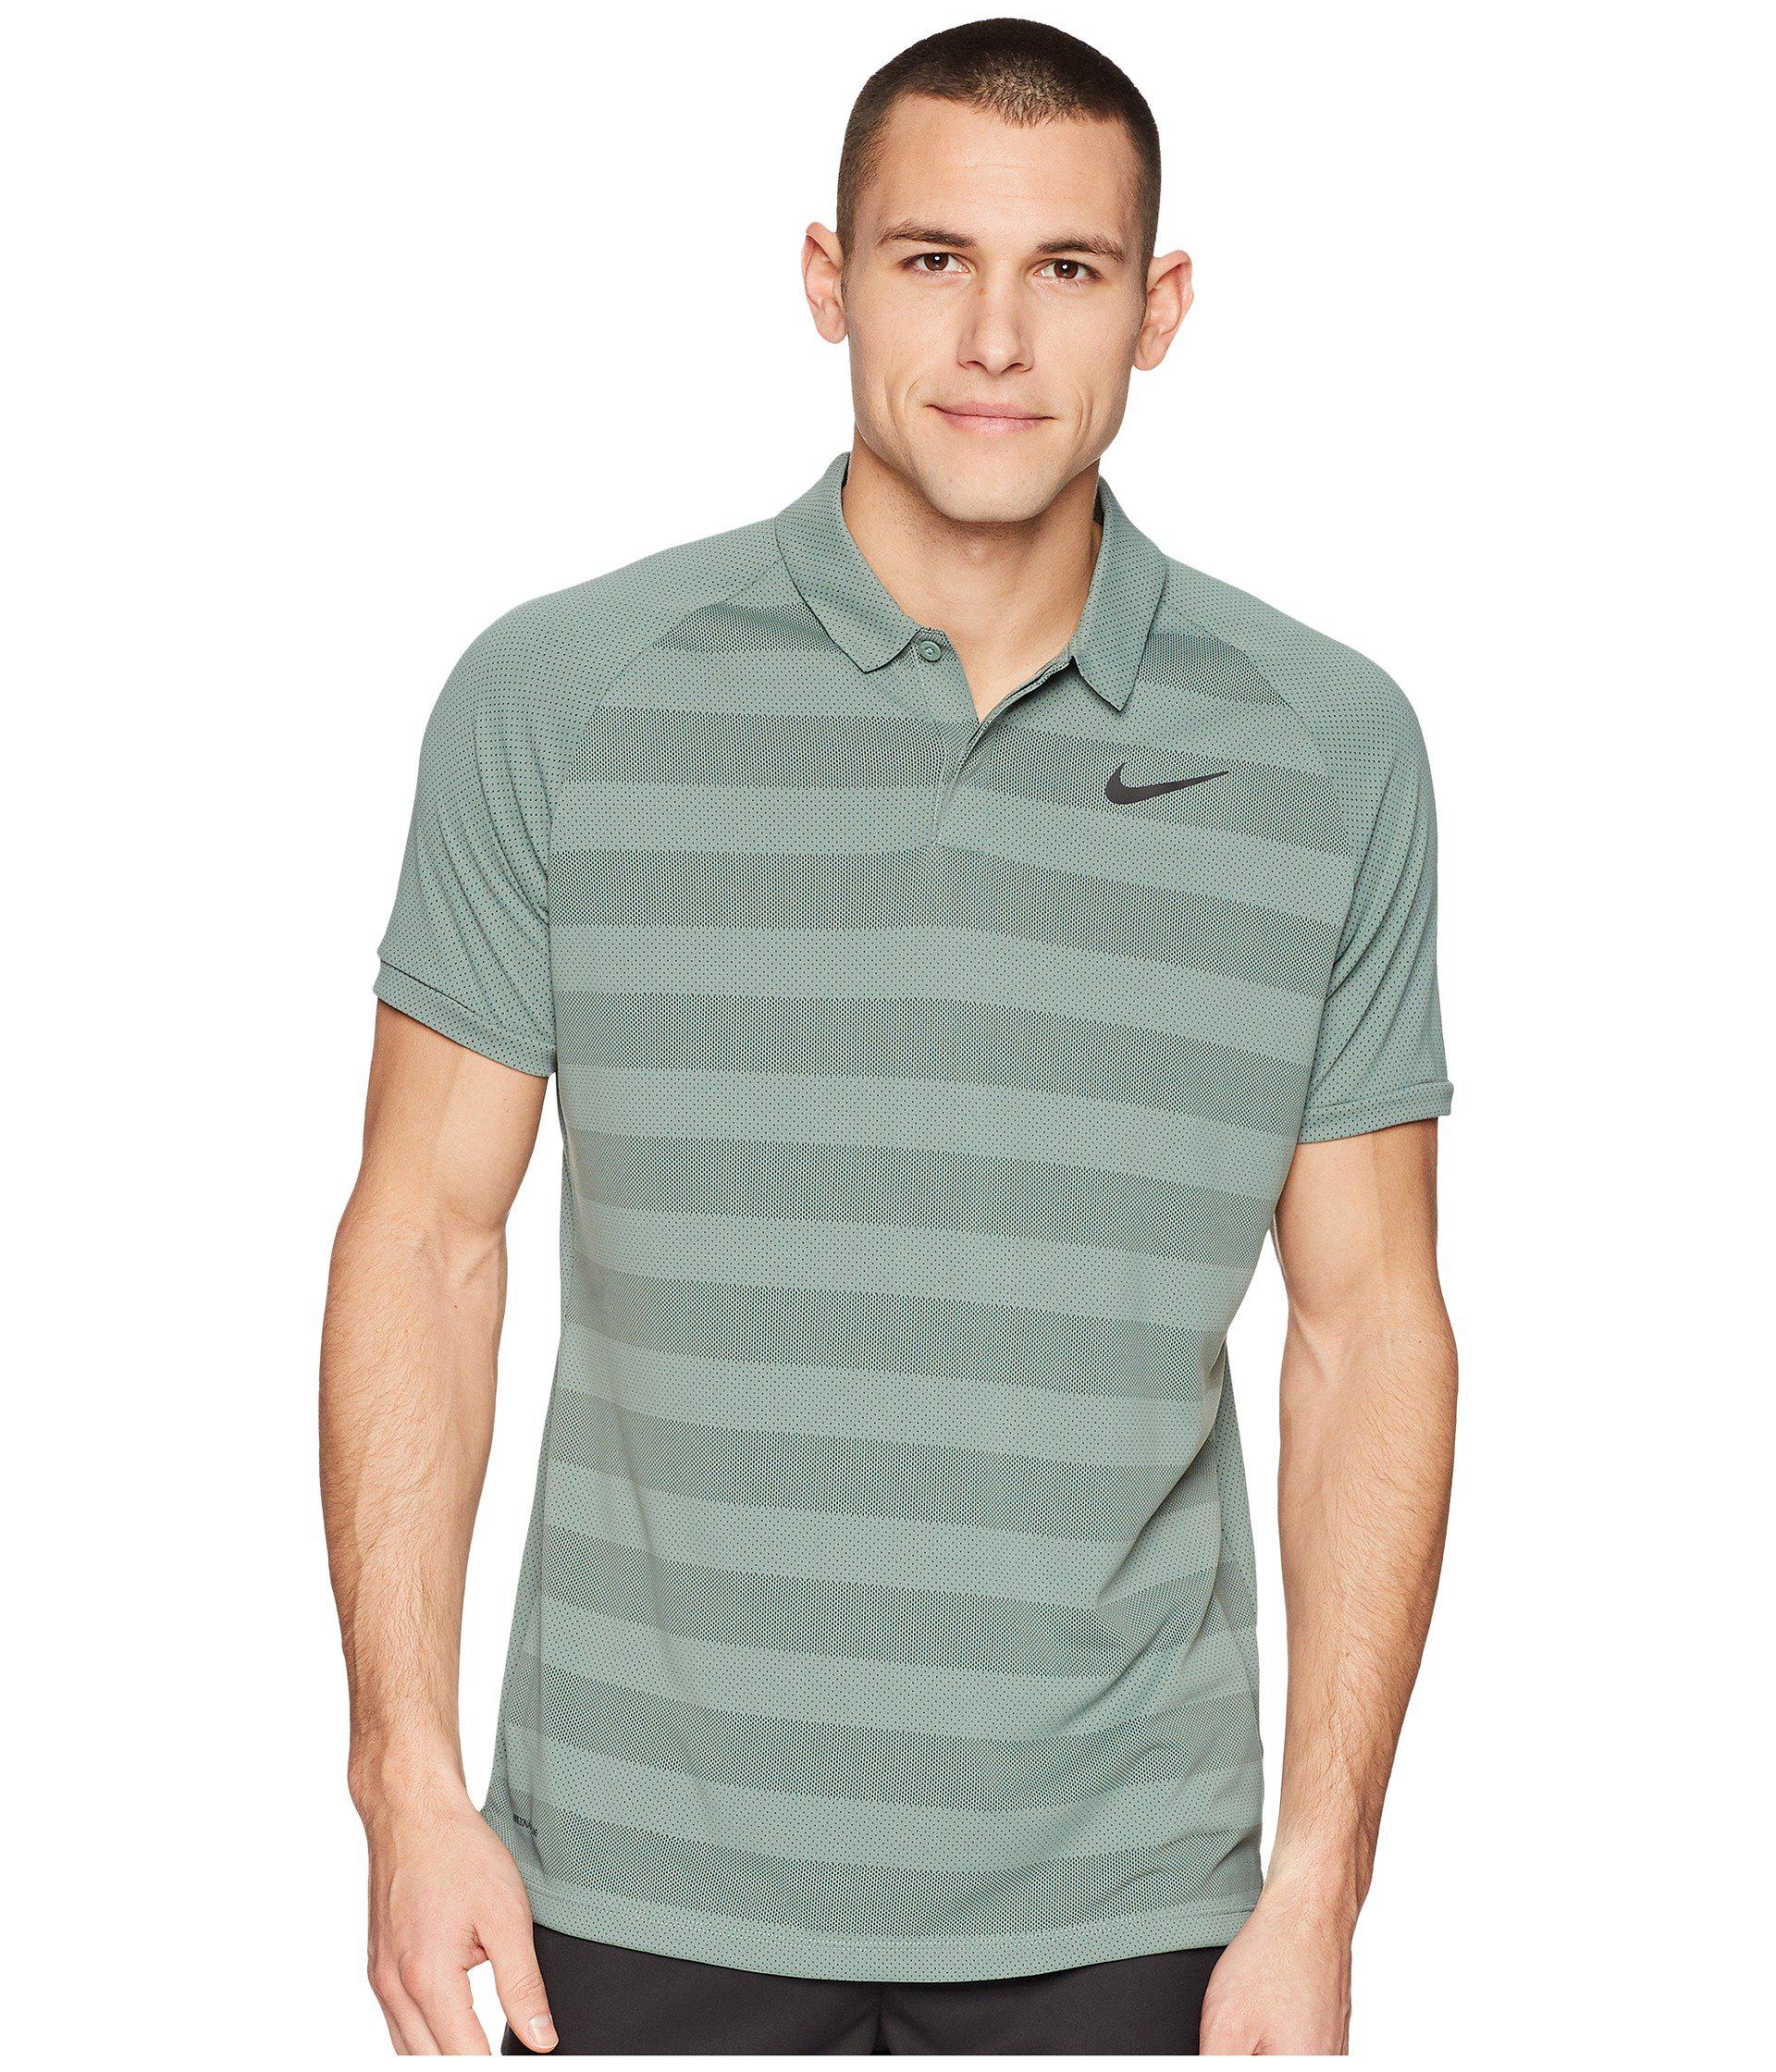 nike zonal cooling polo